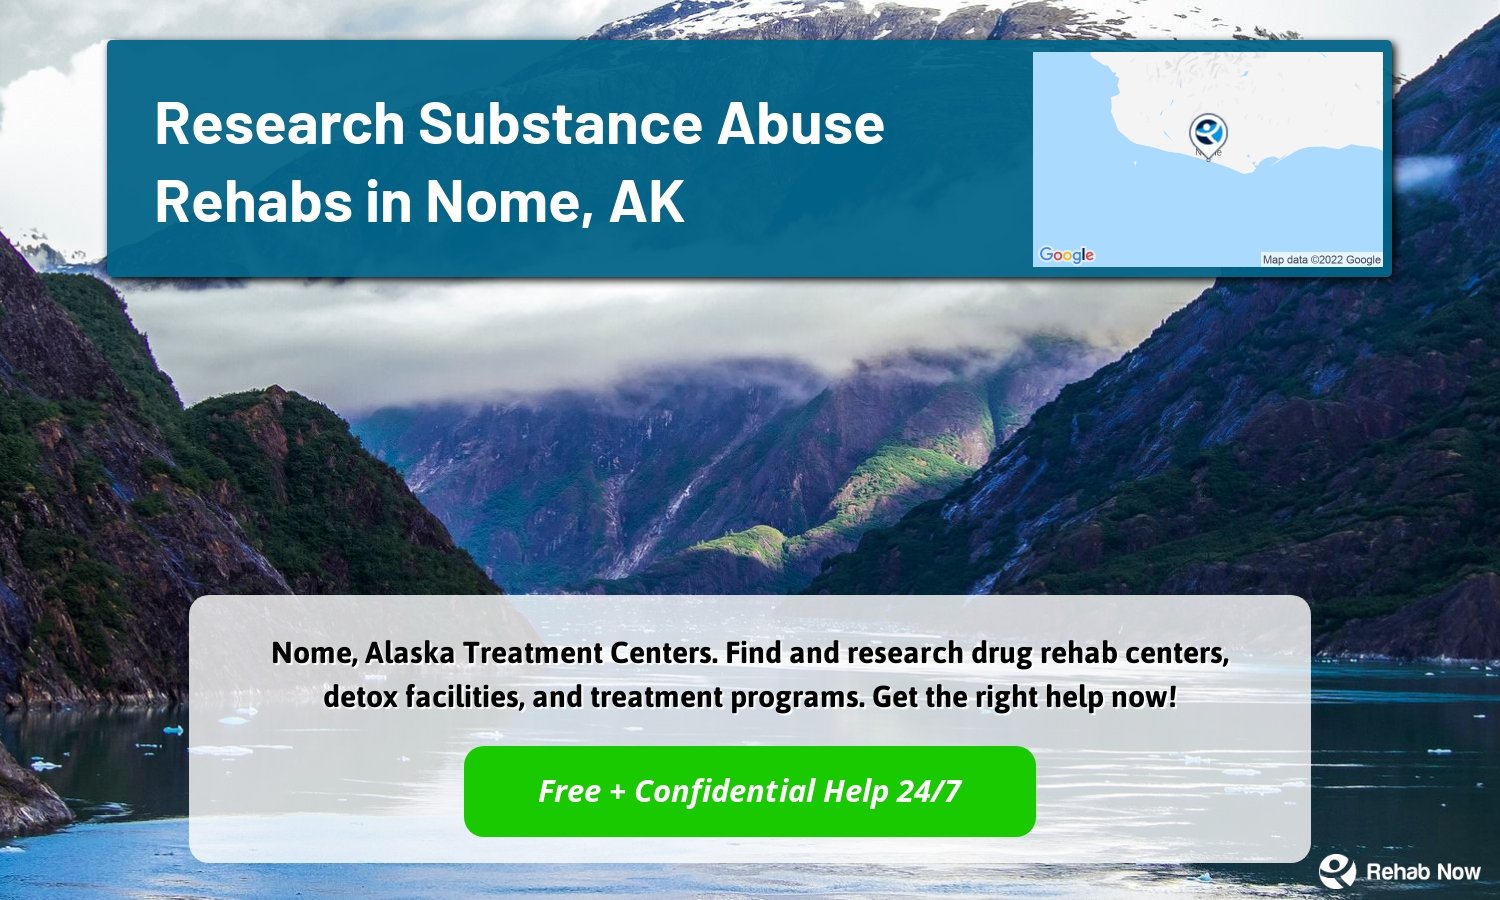 Nome, Alaska Treatment Centers. Find and research drug rehab centers, detox facilities, and treatment programs. Get the right help now!